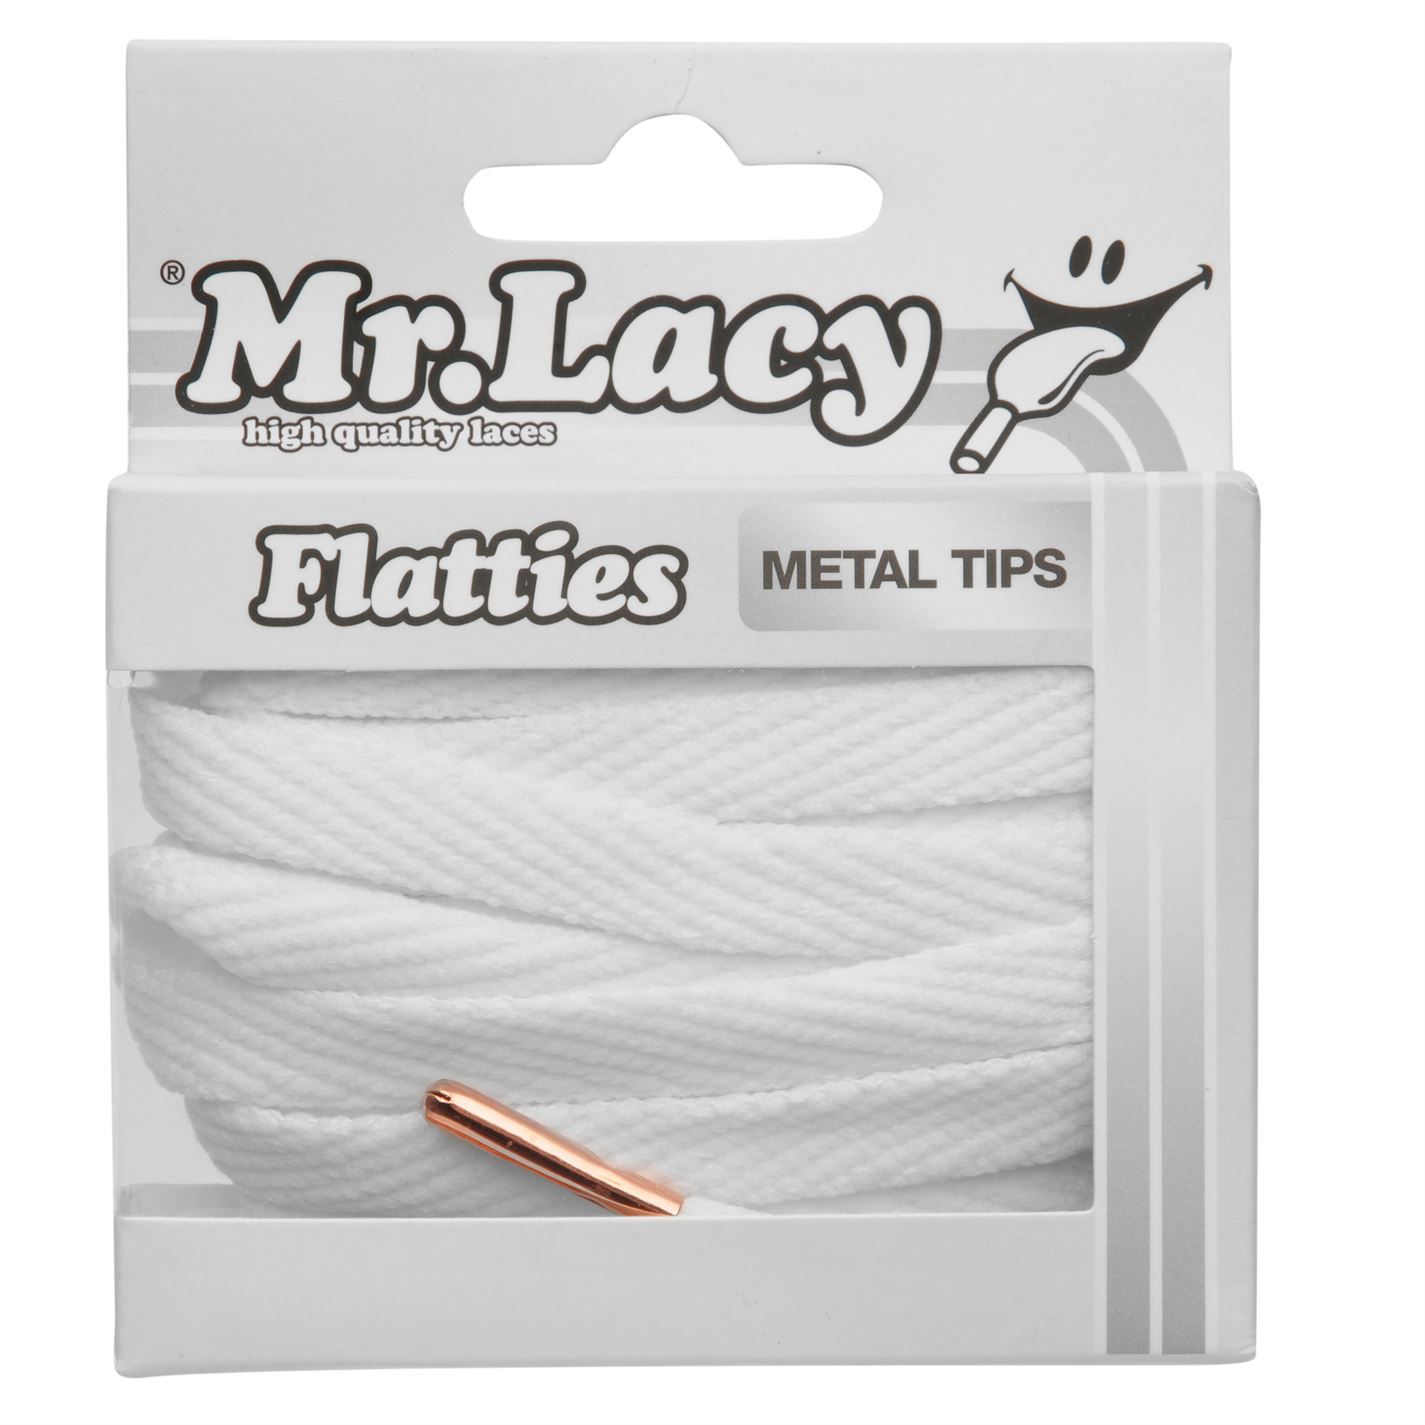 Premium Shoelaces Flat White Laces with Silver Metal Tip Mr Lacy Flatties 